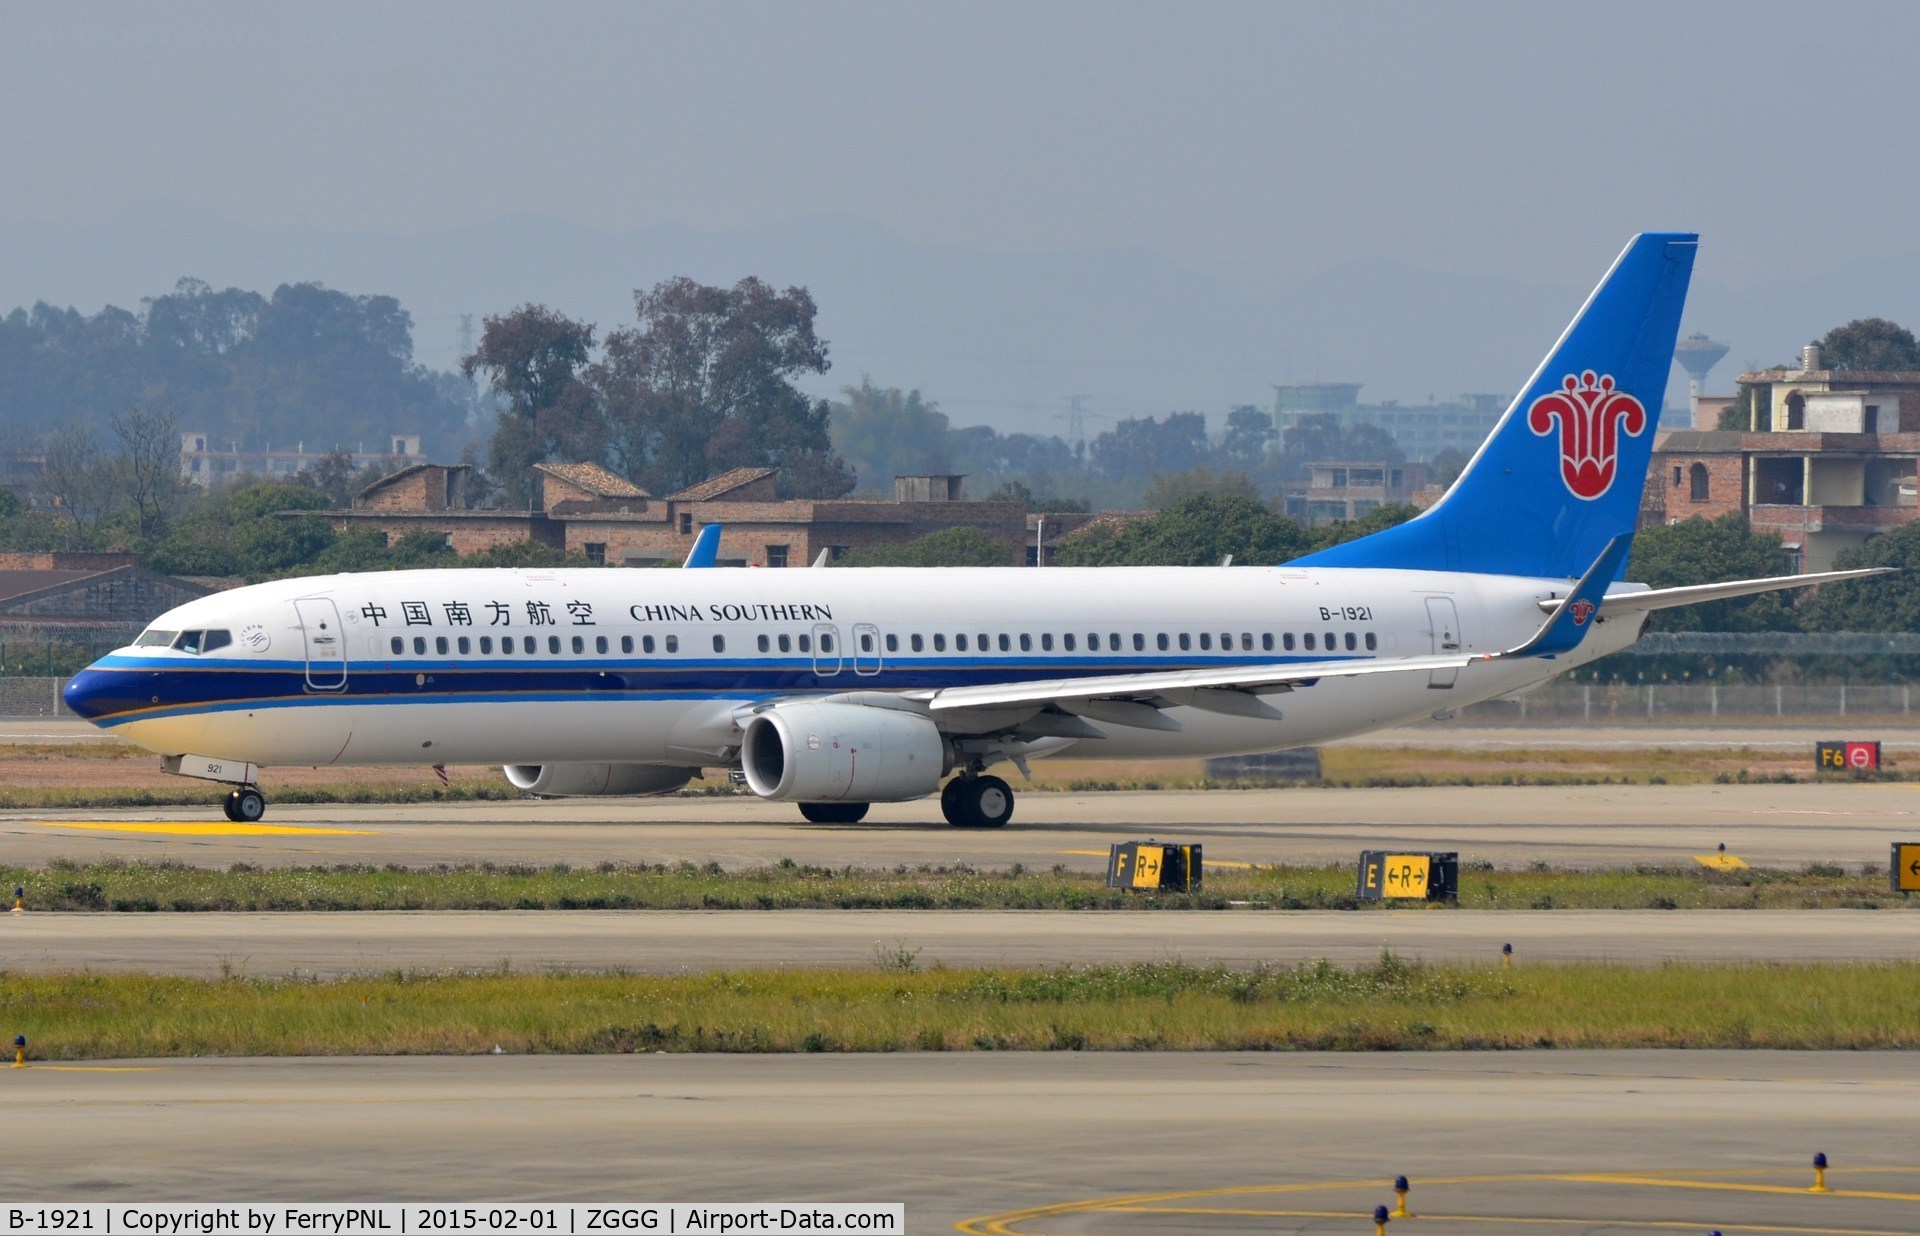 B-1921, 2014 Boeing 737-86N C/N 41245, China Southern B738 taxiing for departure.